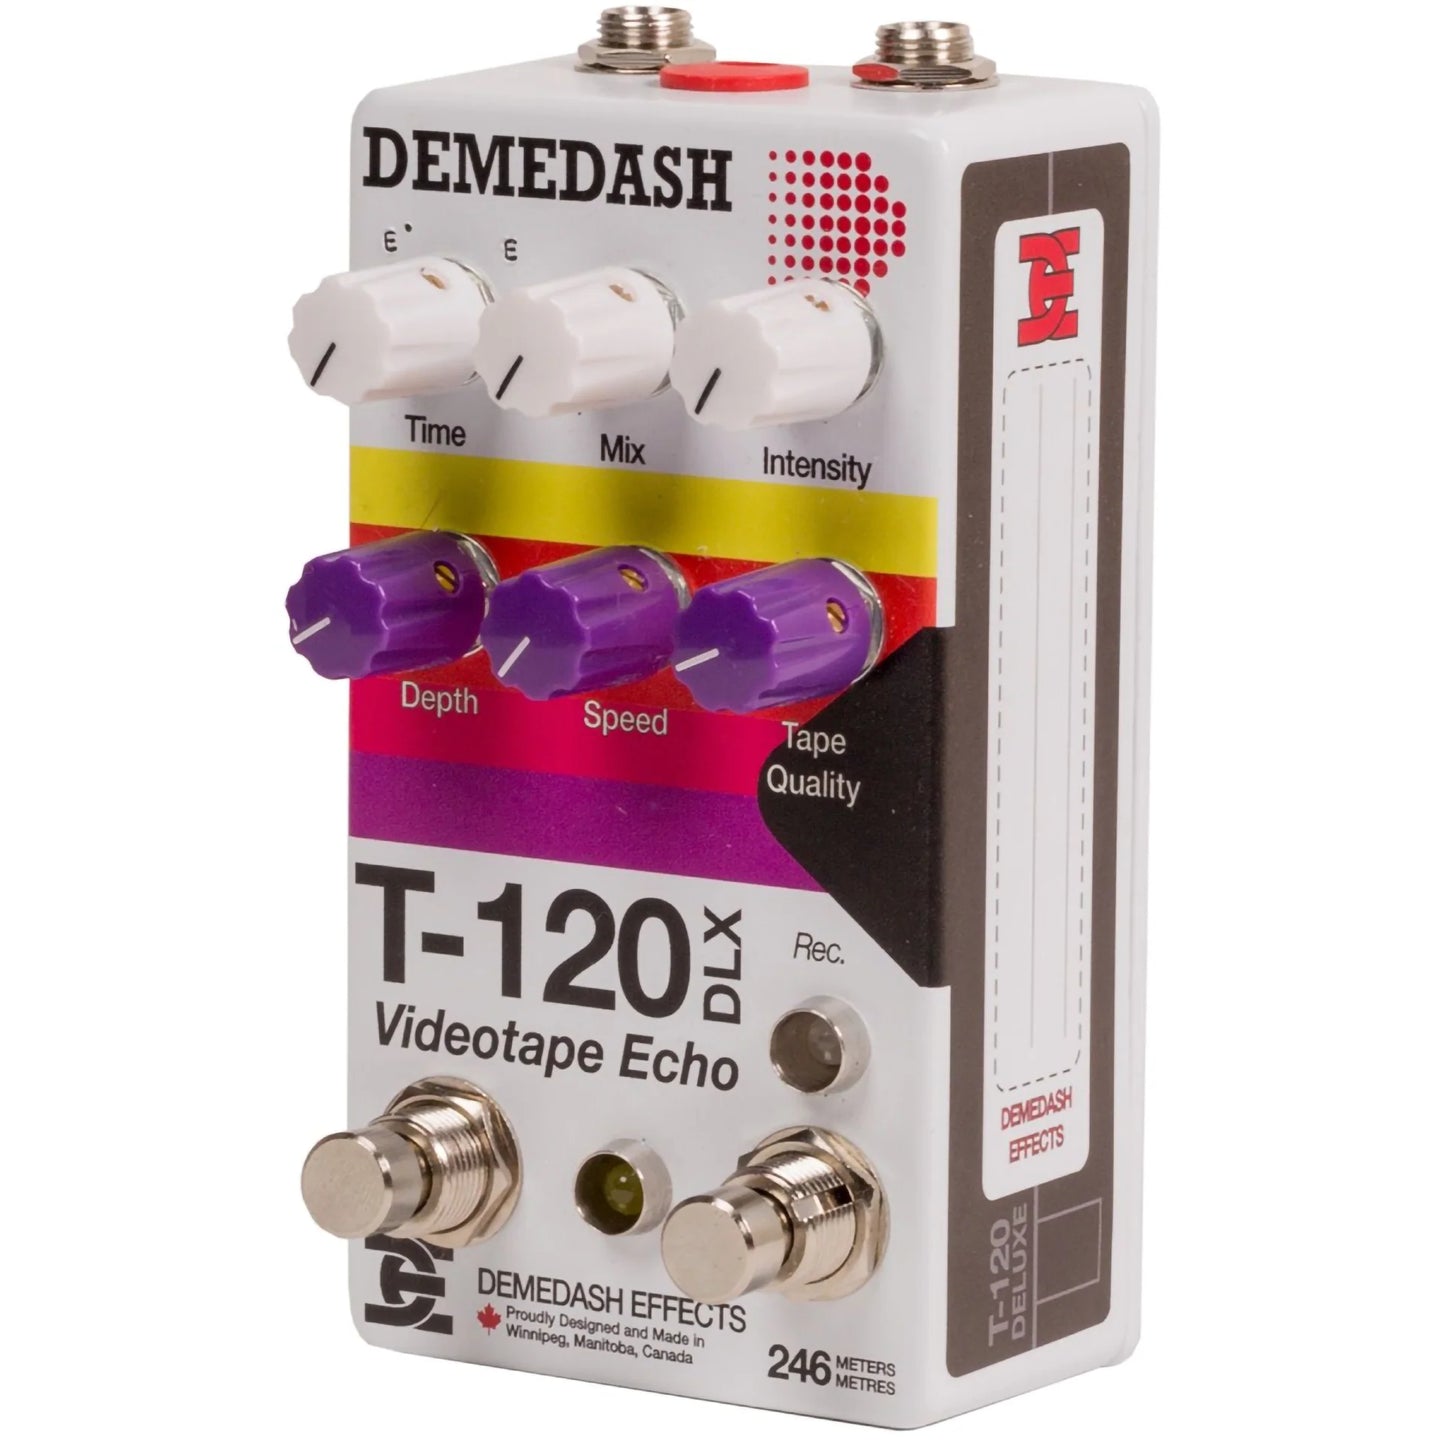 Demedash Effects T-120 Deluxe Pedal V2